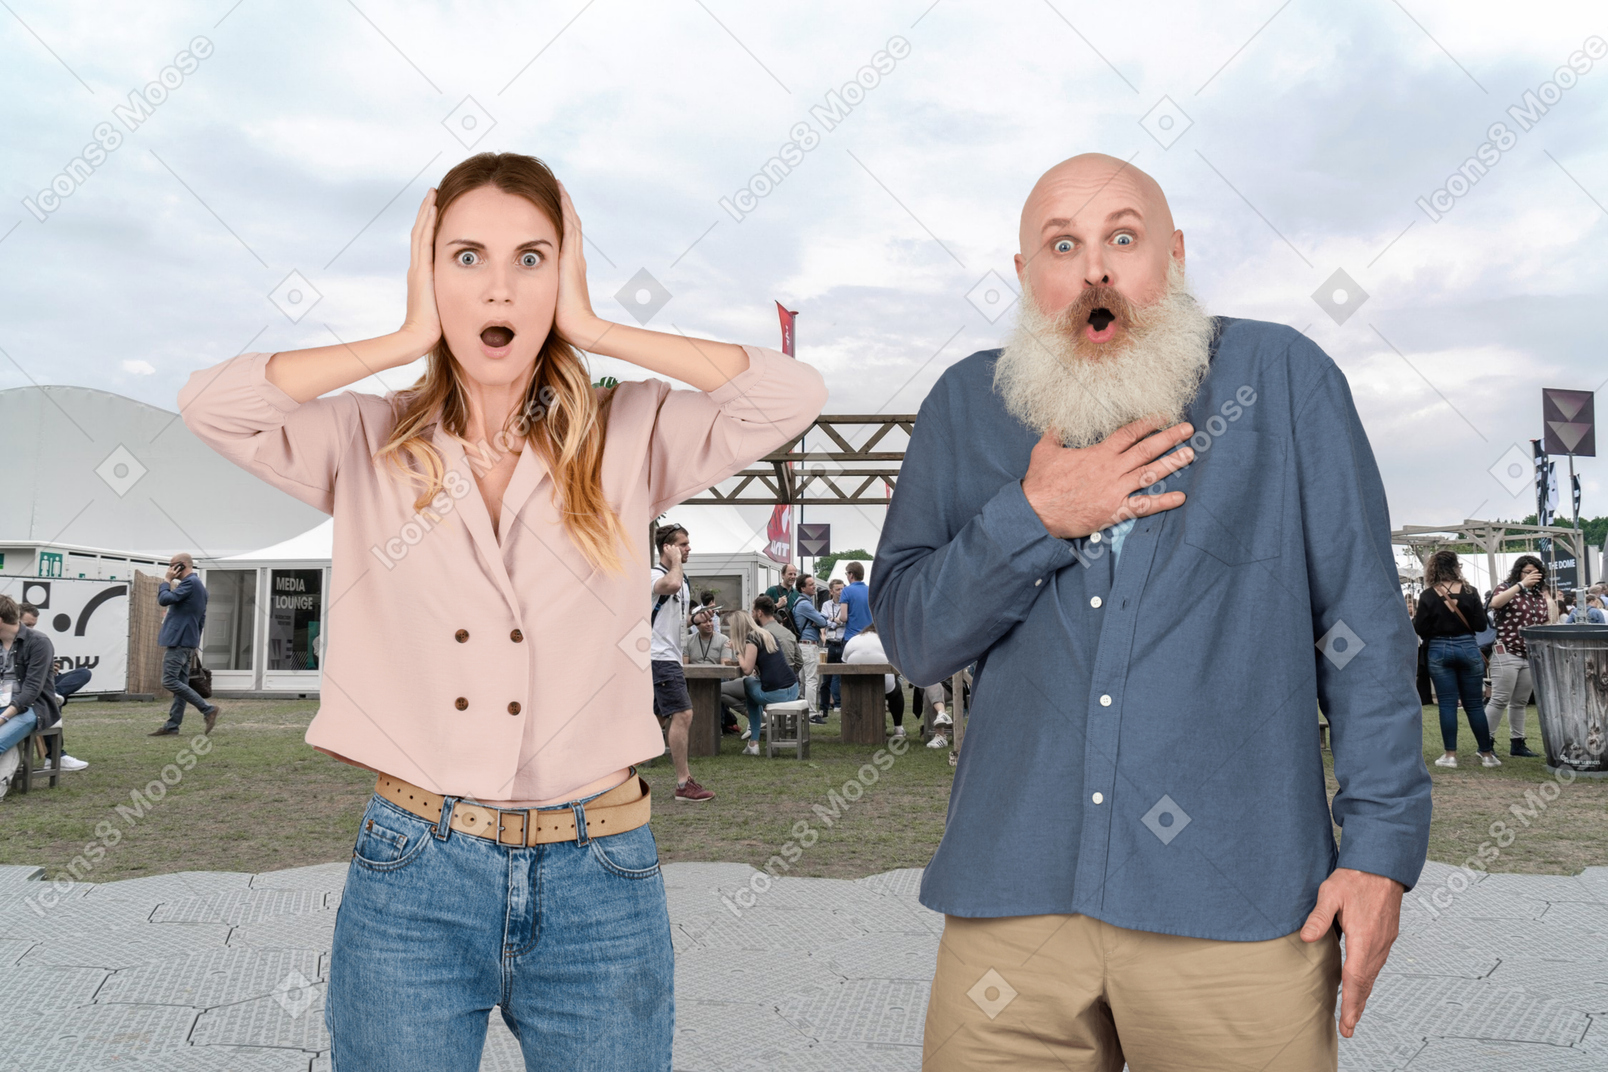 Young woman and aged man standing outside and looking really excited